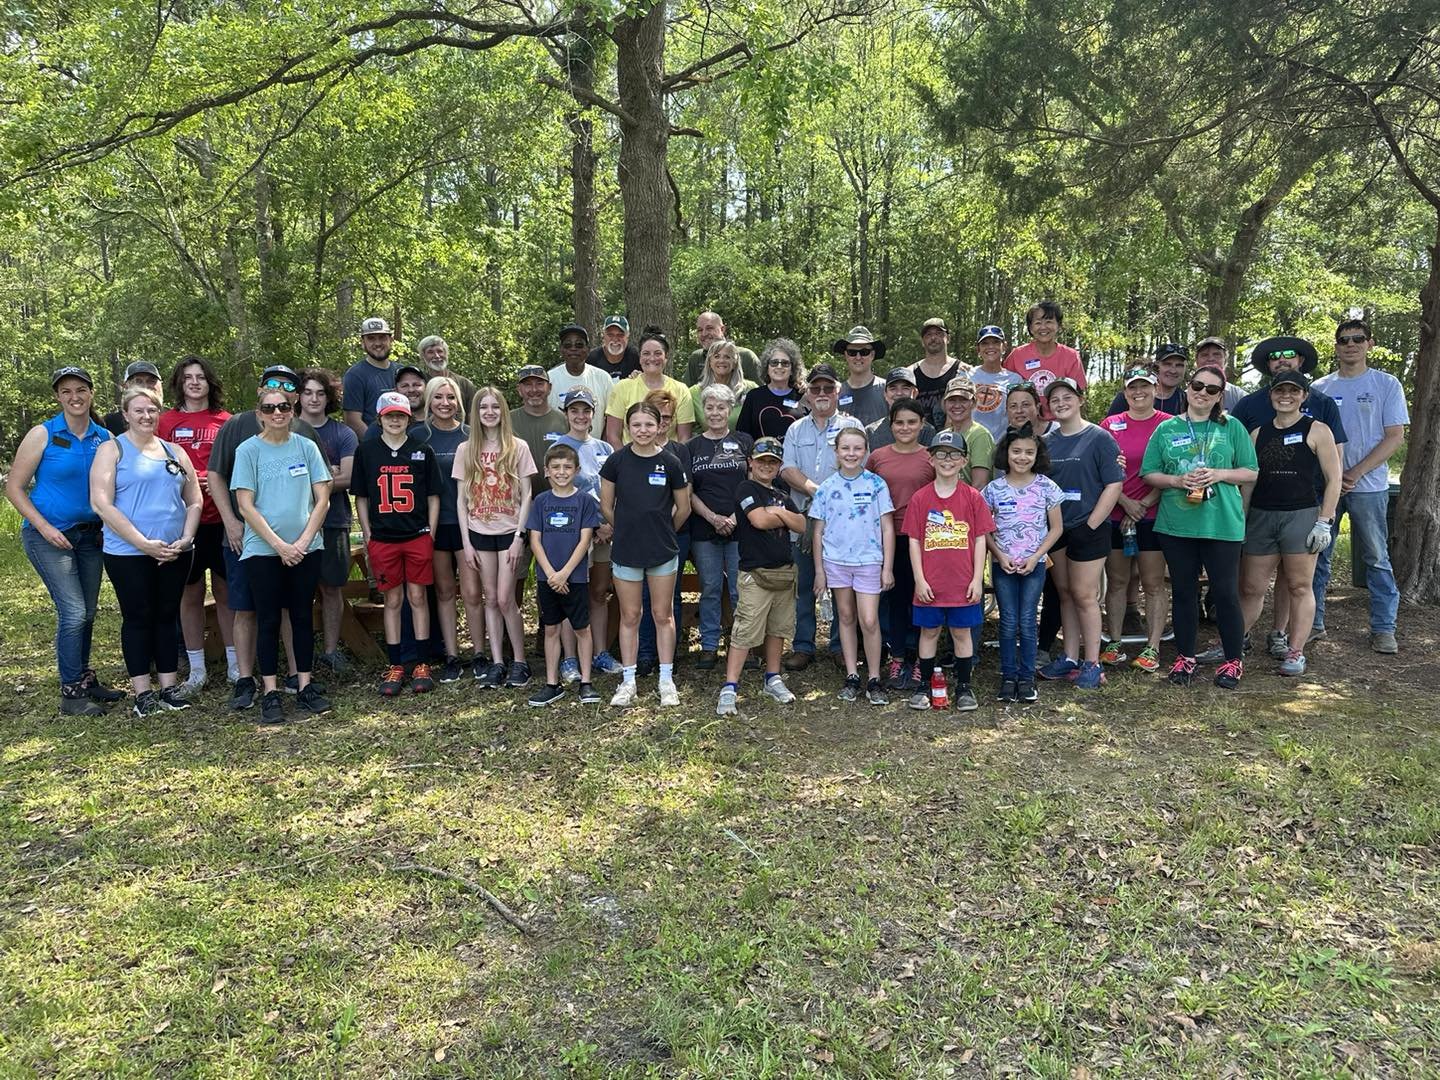 We want to say a HUGE thank you to all of the amazing people from Compassion Christian who came out to help at our work day today. A total of 46 people got amazing things done on our property in preparation for horses which are coming very soon!! The